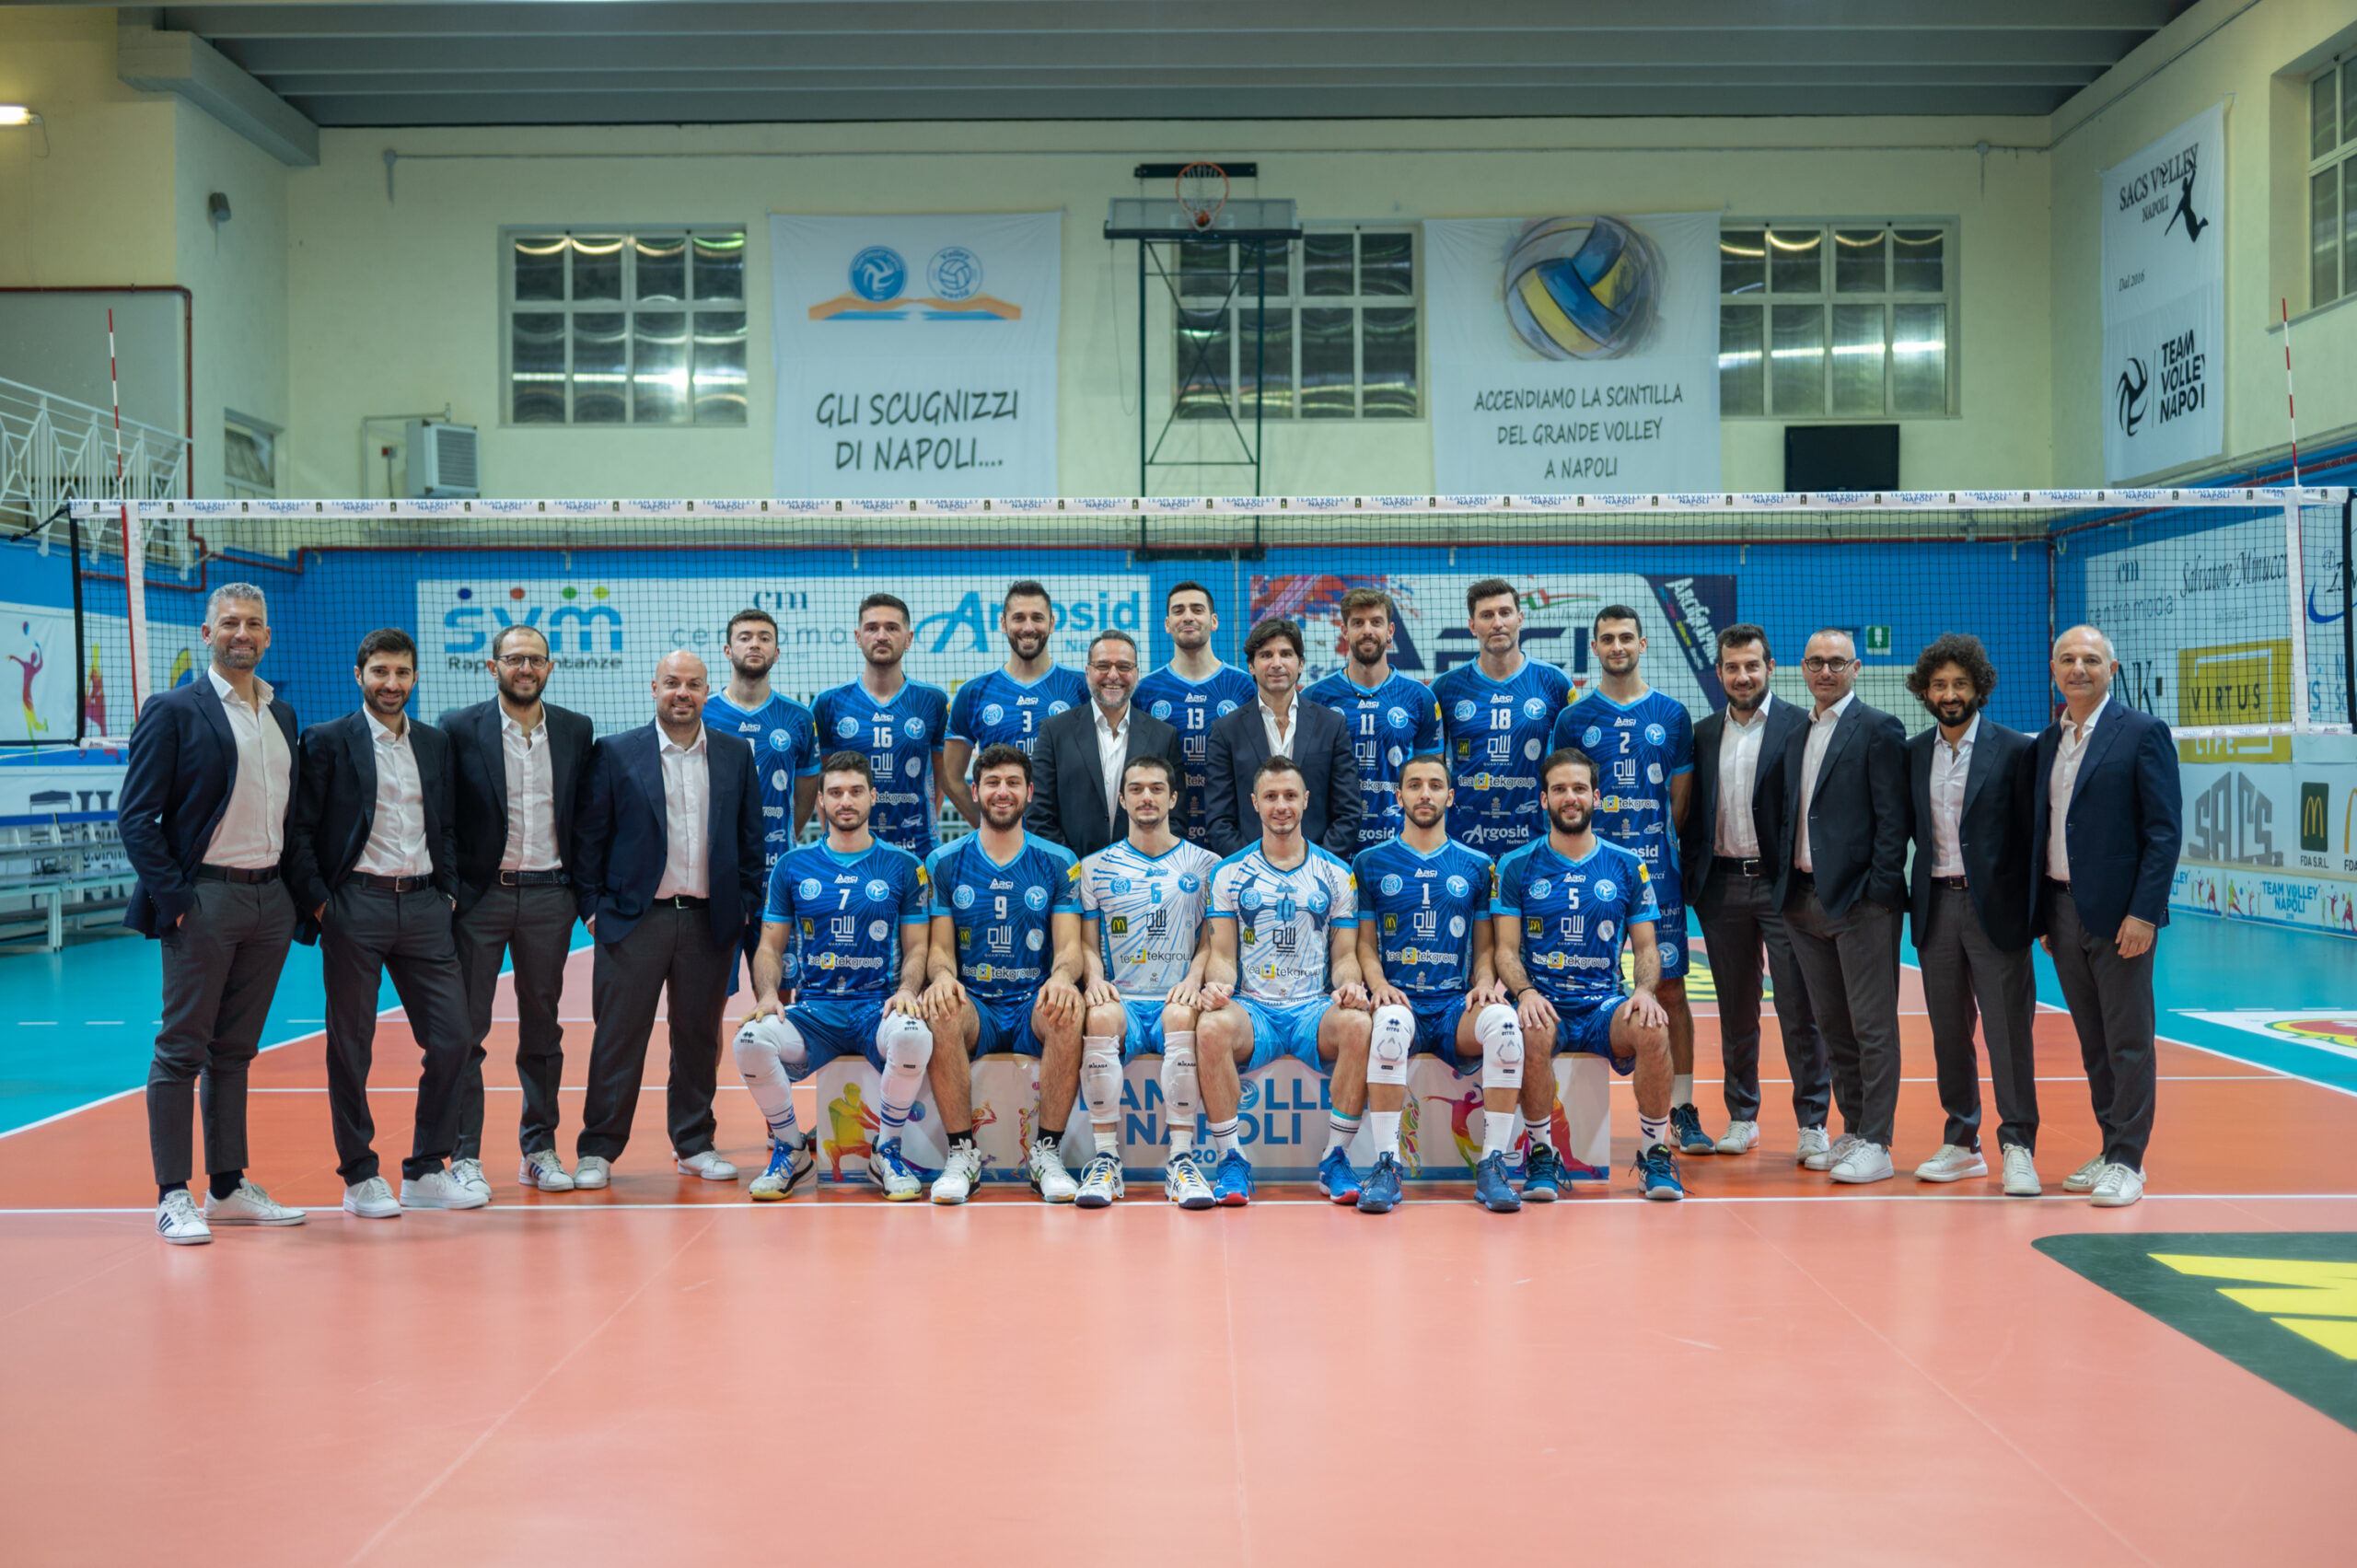 https://www.teamvolleynapoli.it/wp-content/uploads/2023/06/TVN_068-scaled.jpg